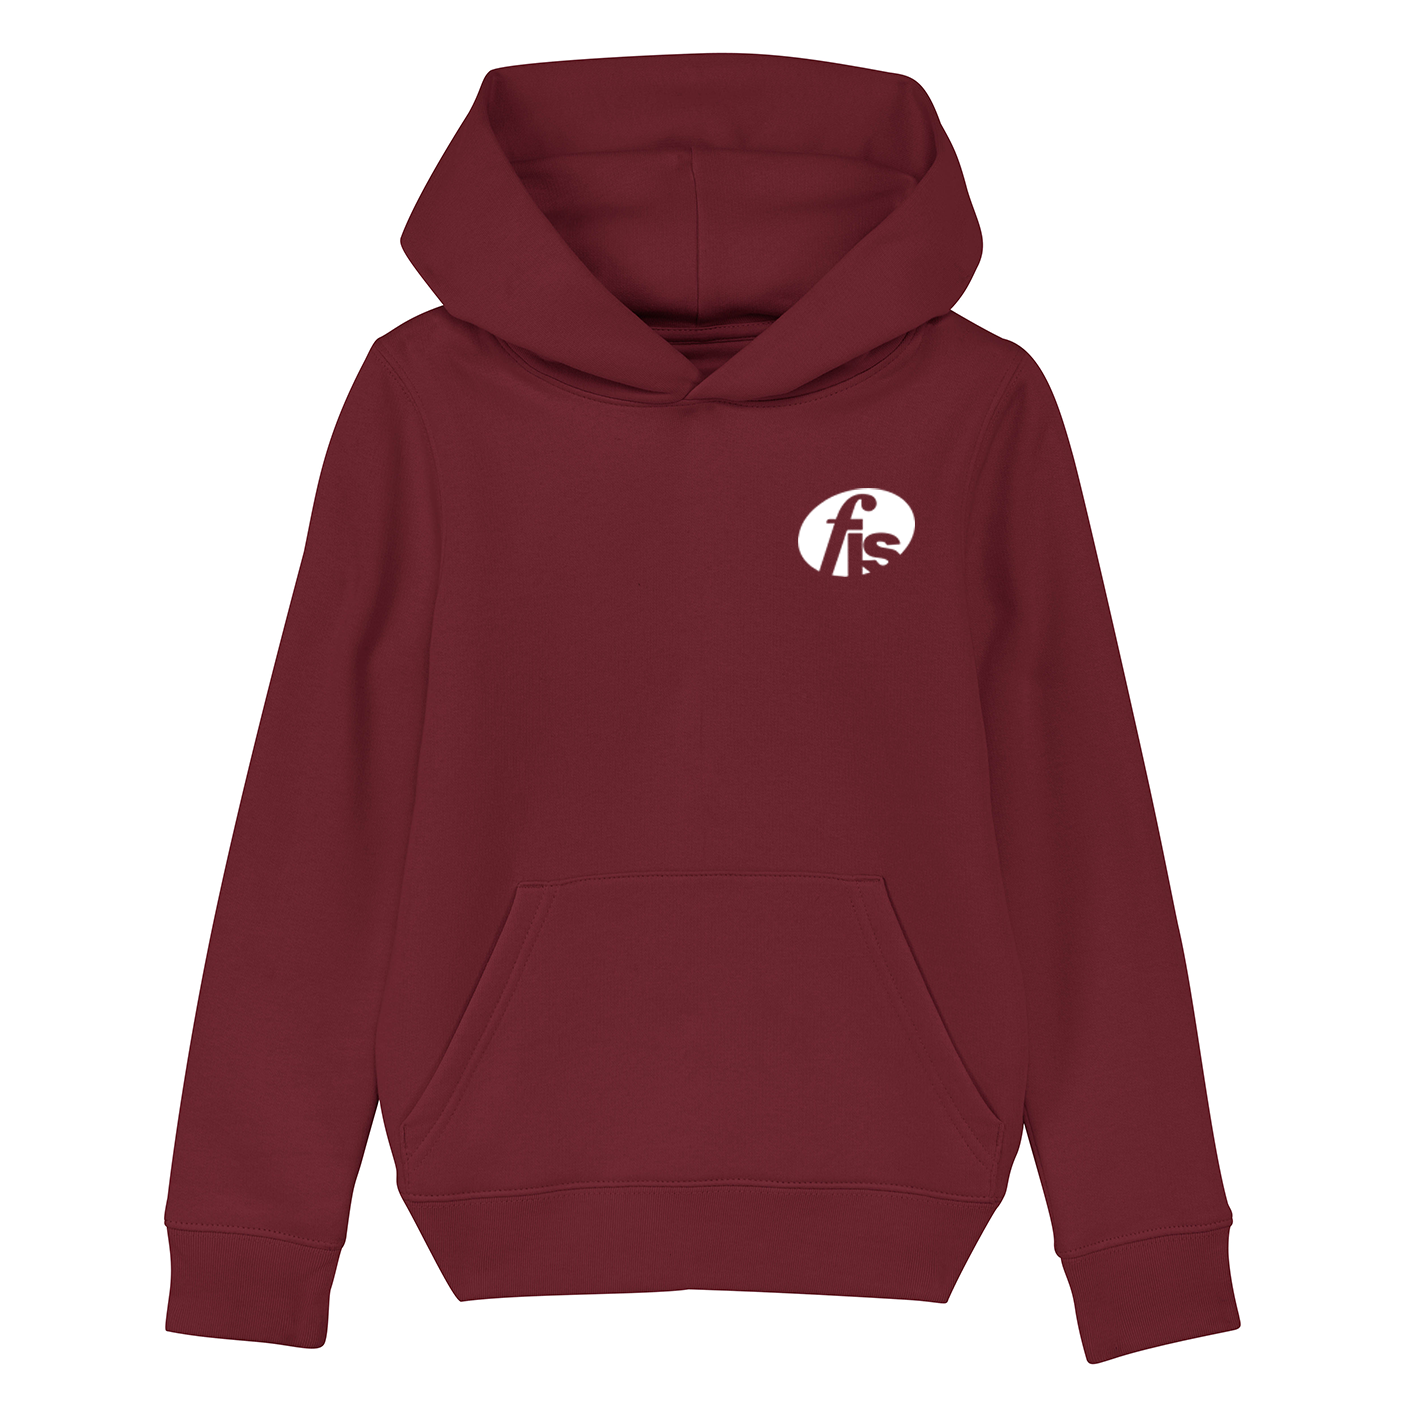 The LIMITED EDITION Hoodie